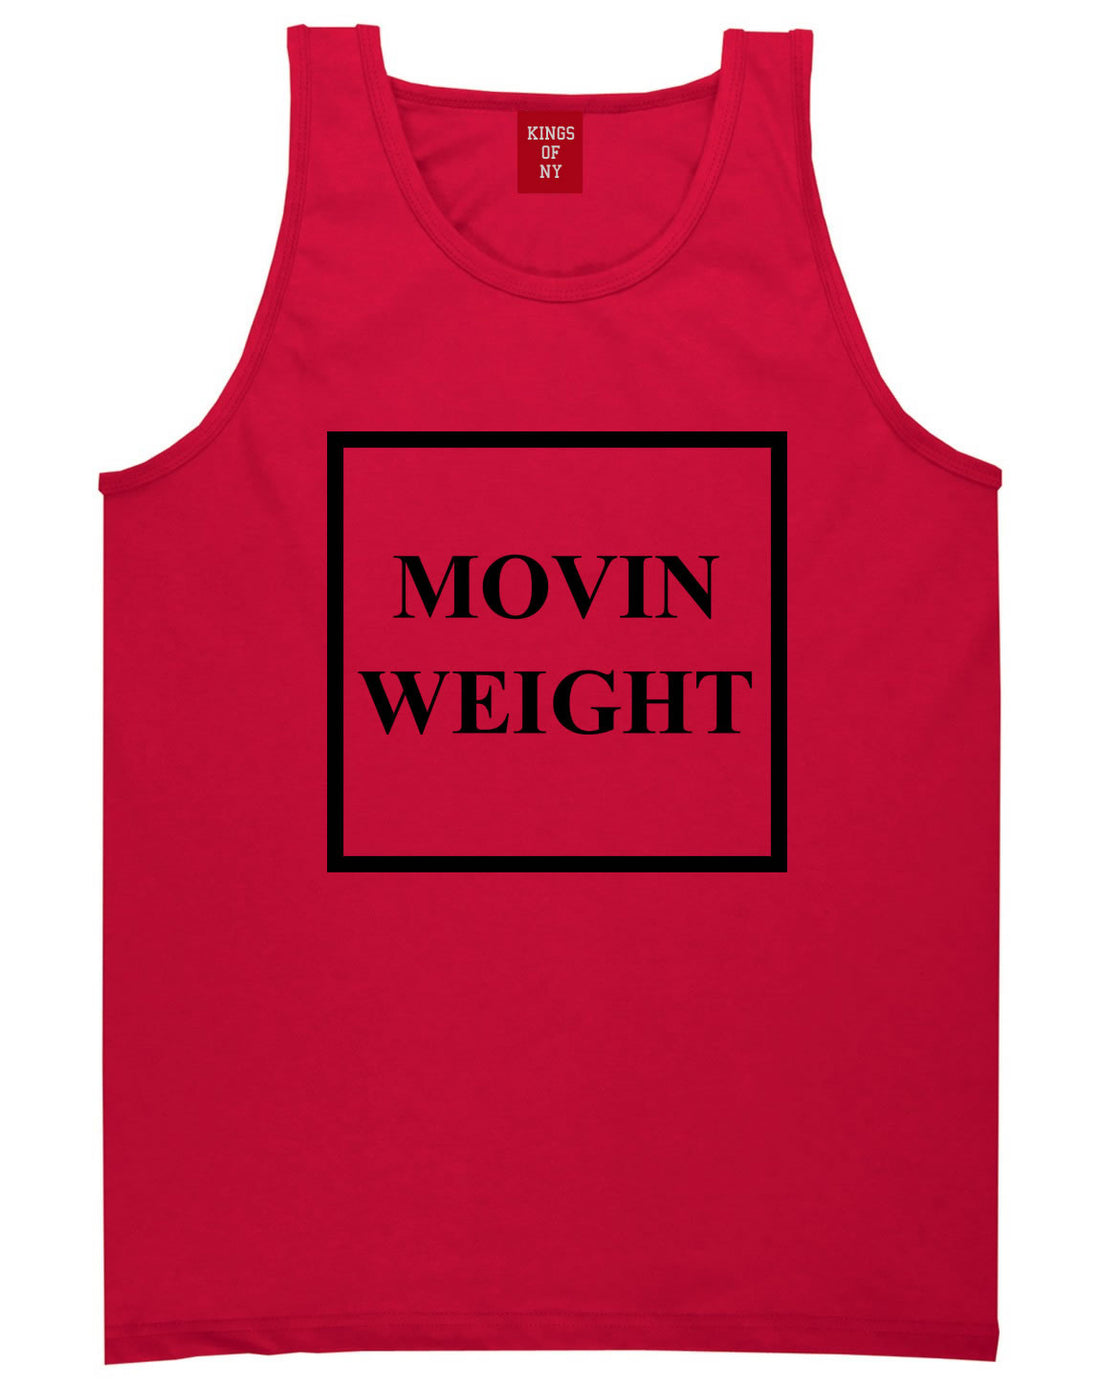 Movin Weight Hustler Tank Top in Red by Kings Of NY